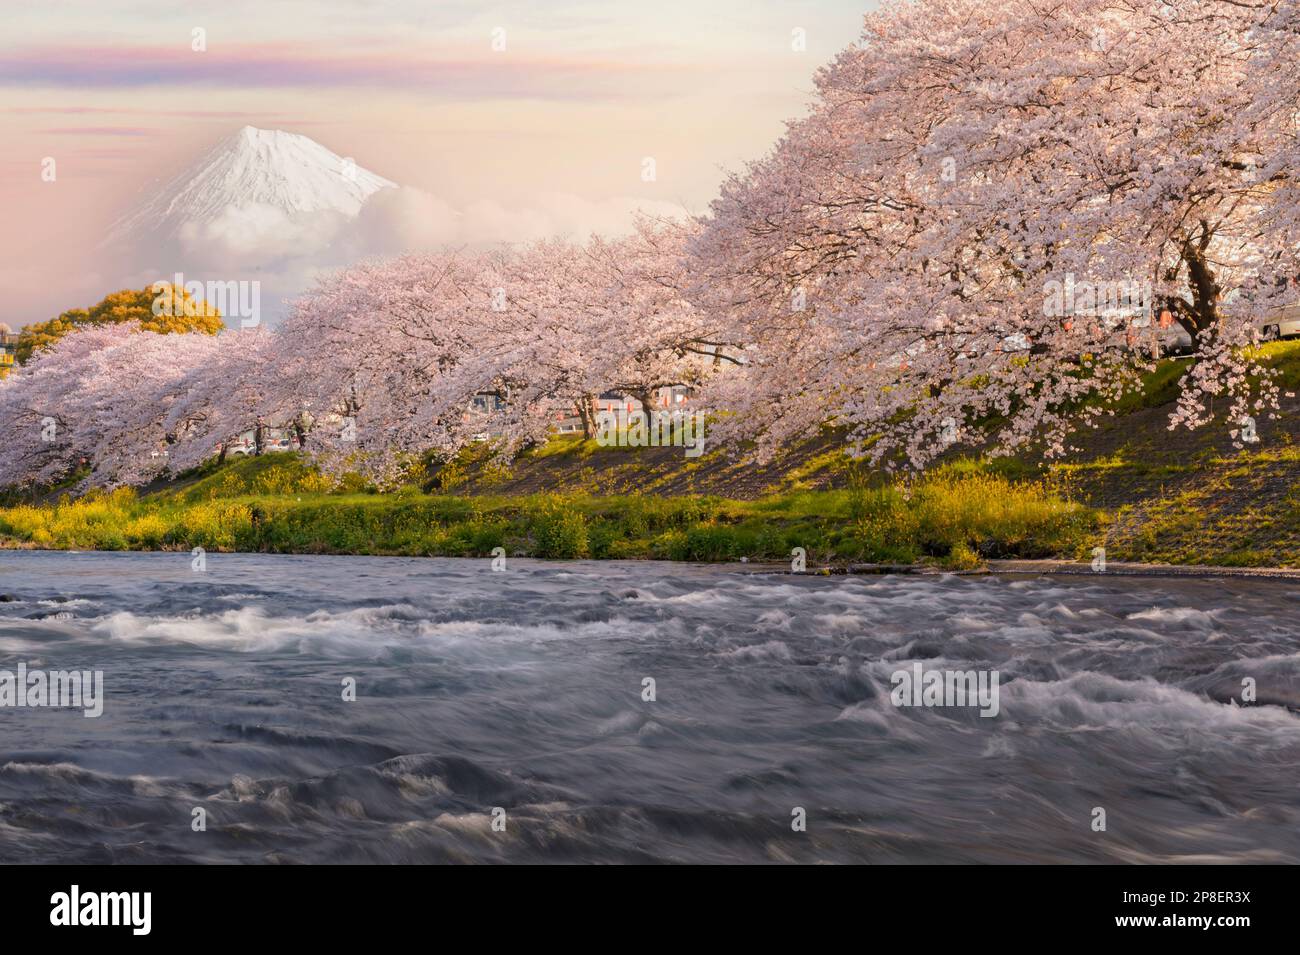 Cherry trees along a river with snowcapped peak of Mt Fuji in background, Yamanashi Prefecture, Honshu, Japan Stock Photo